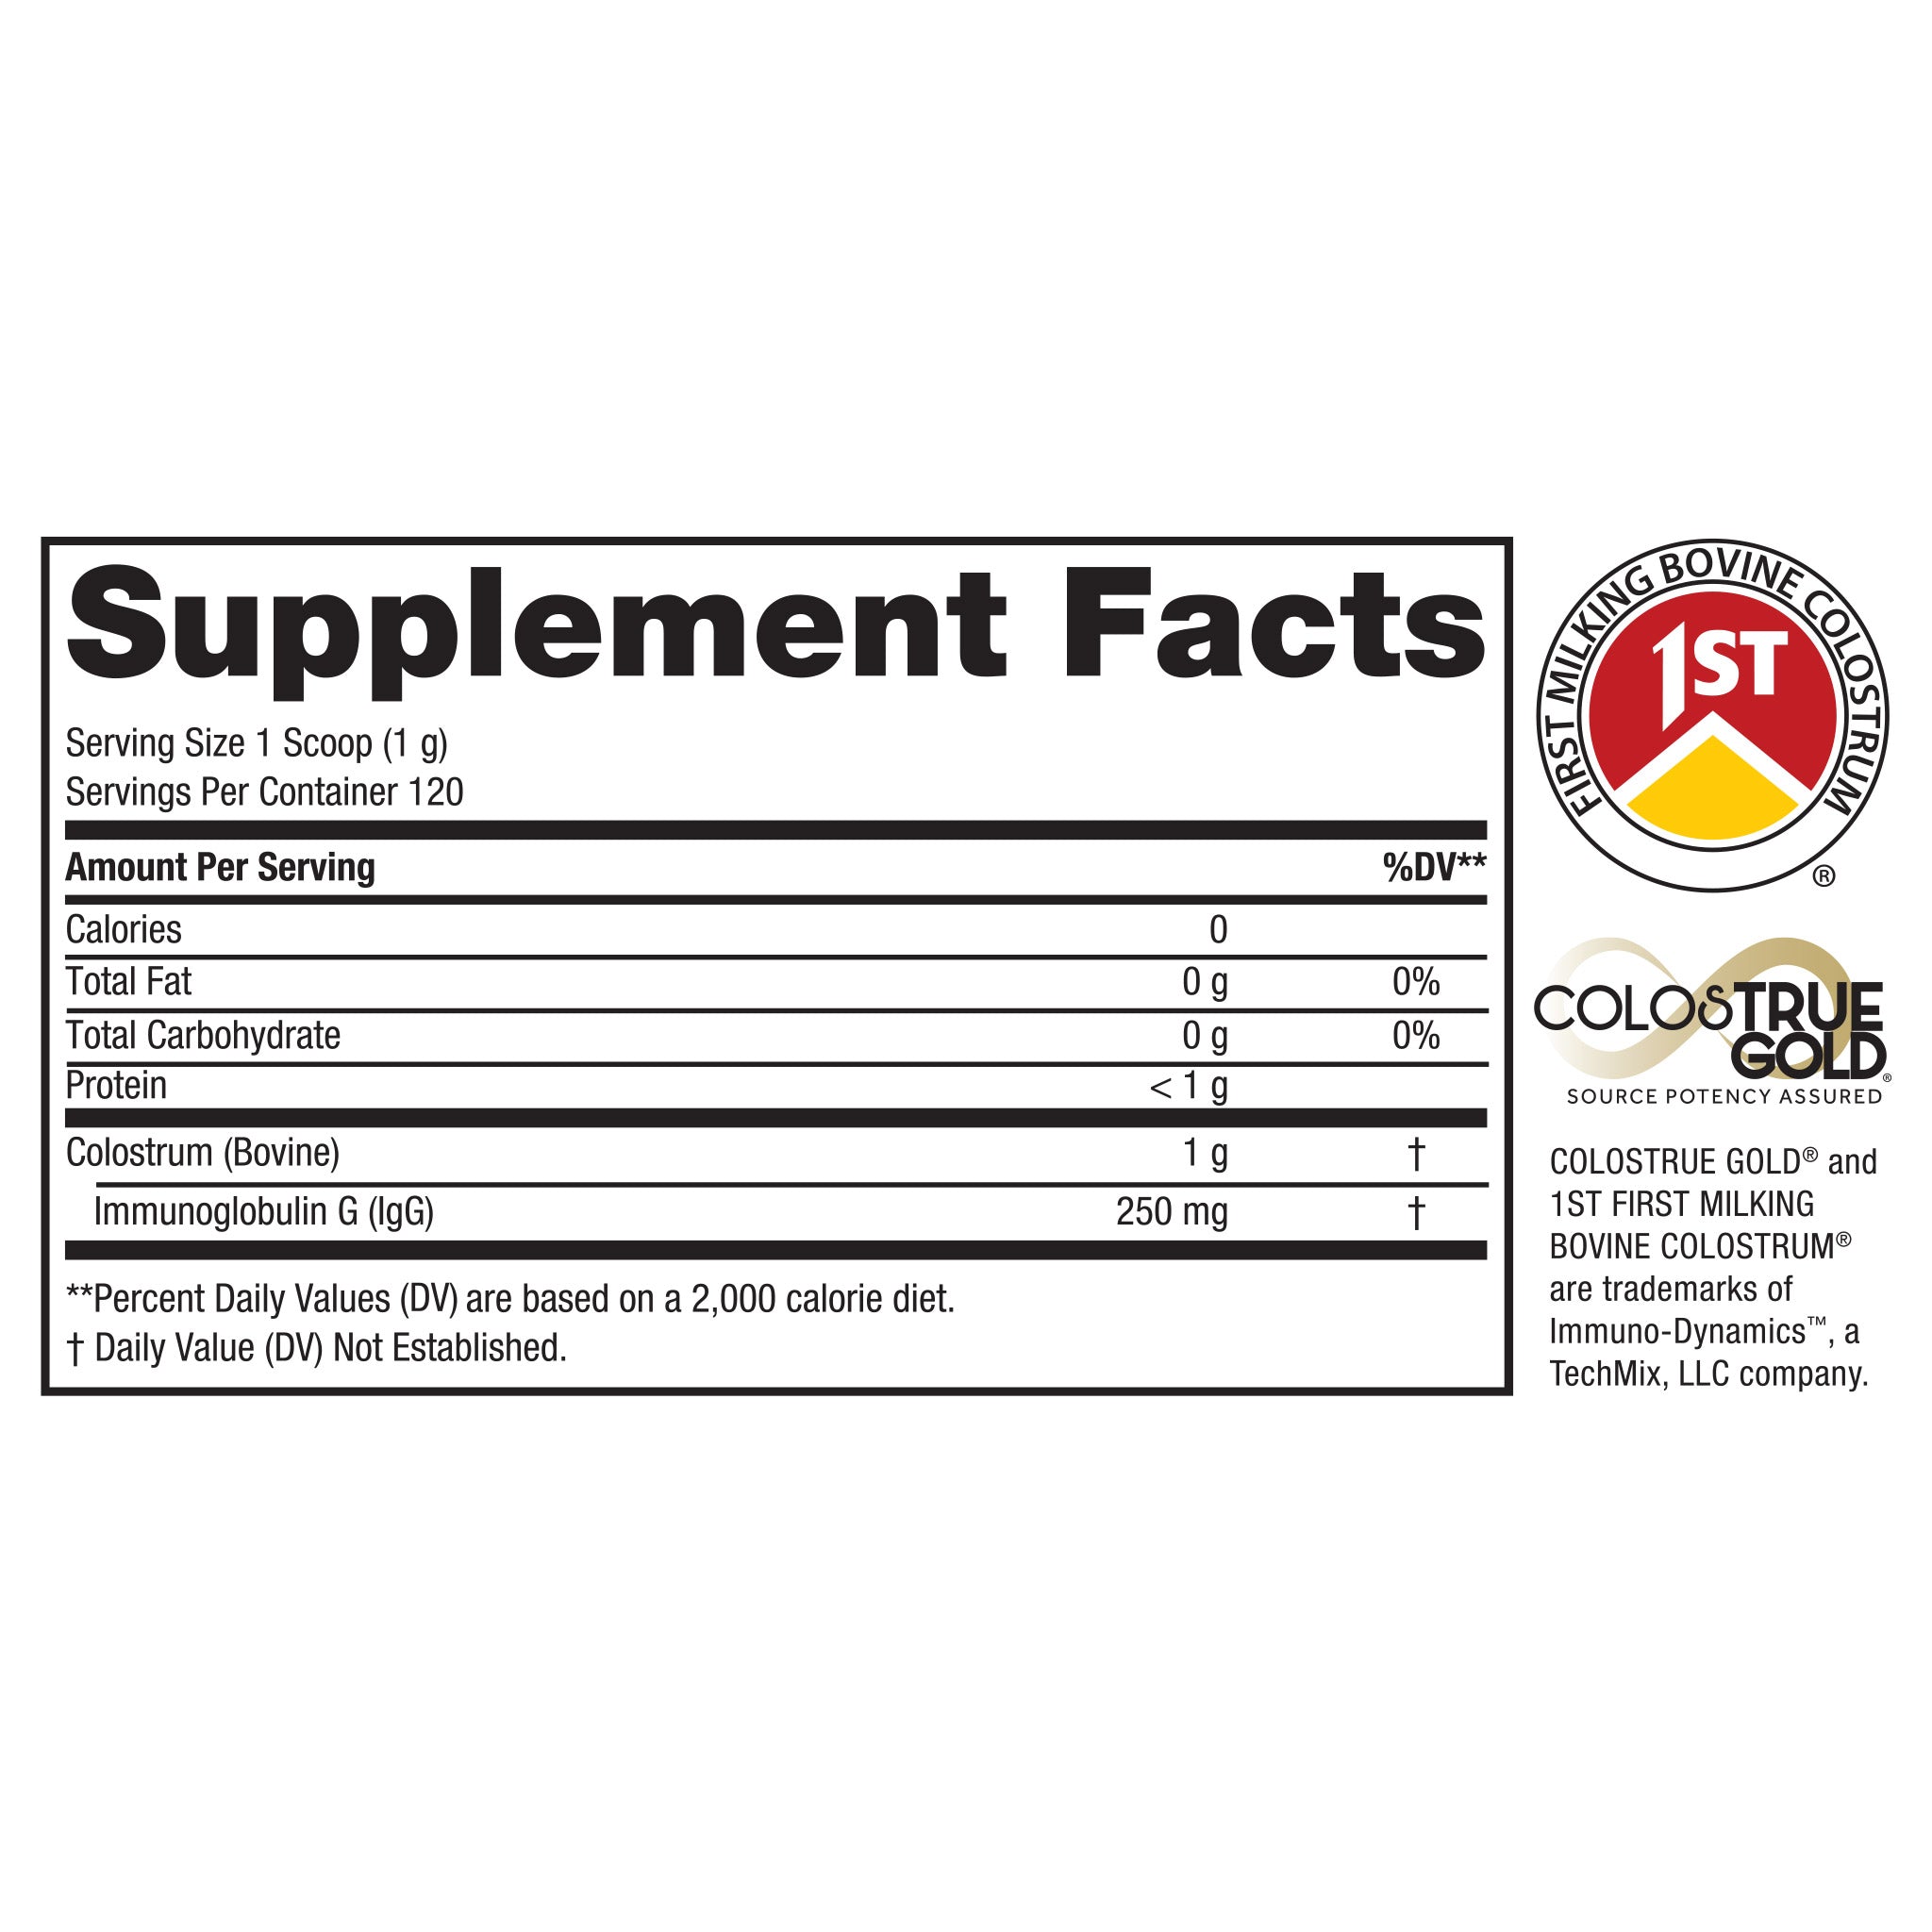 Pure Steel First Milking Bovine Colostrum Supplement Facts Panel